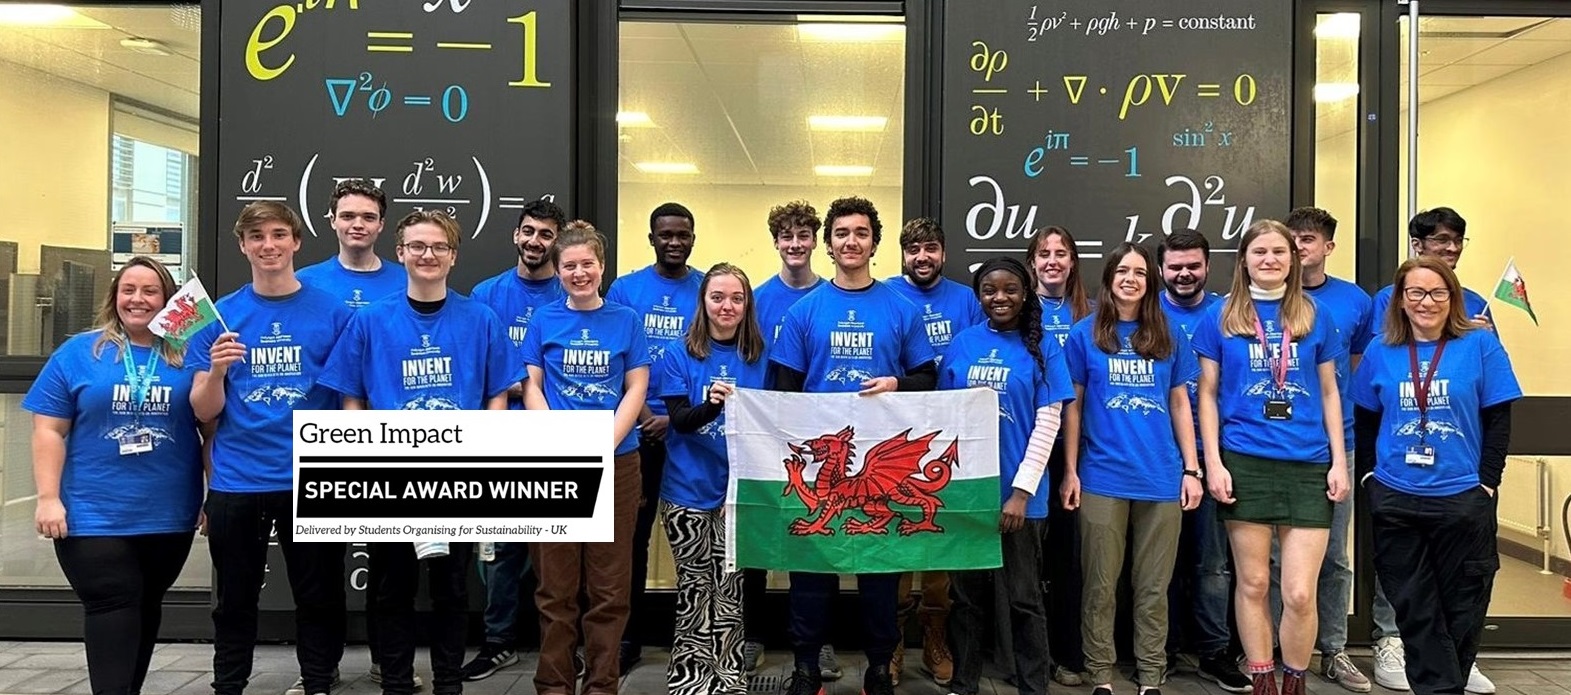 Student group at Swansea University wearing matching Invent for the Planet t-shirts